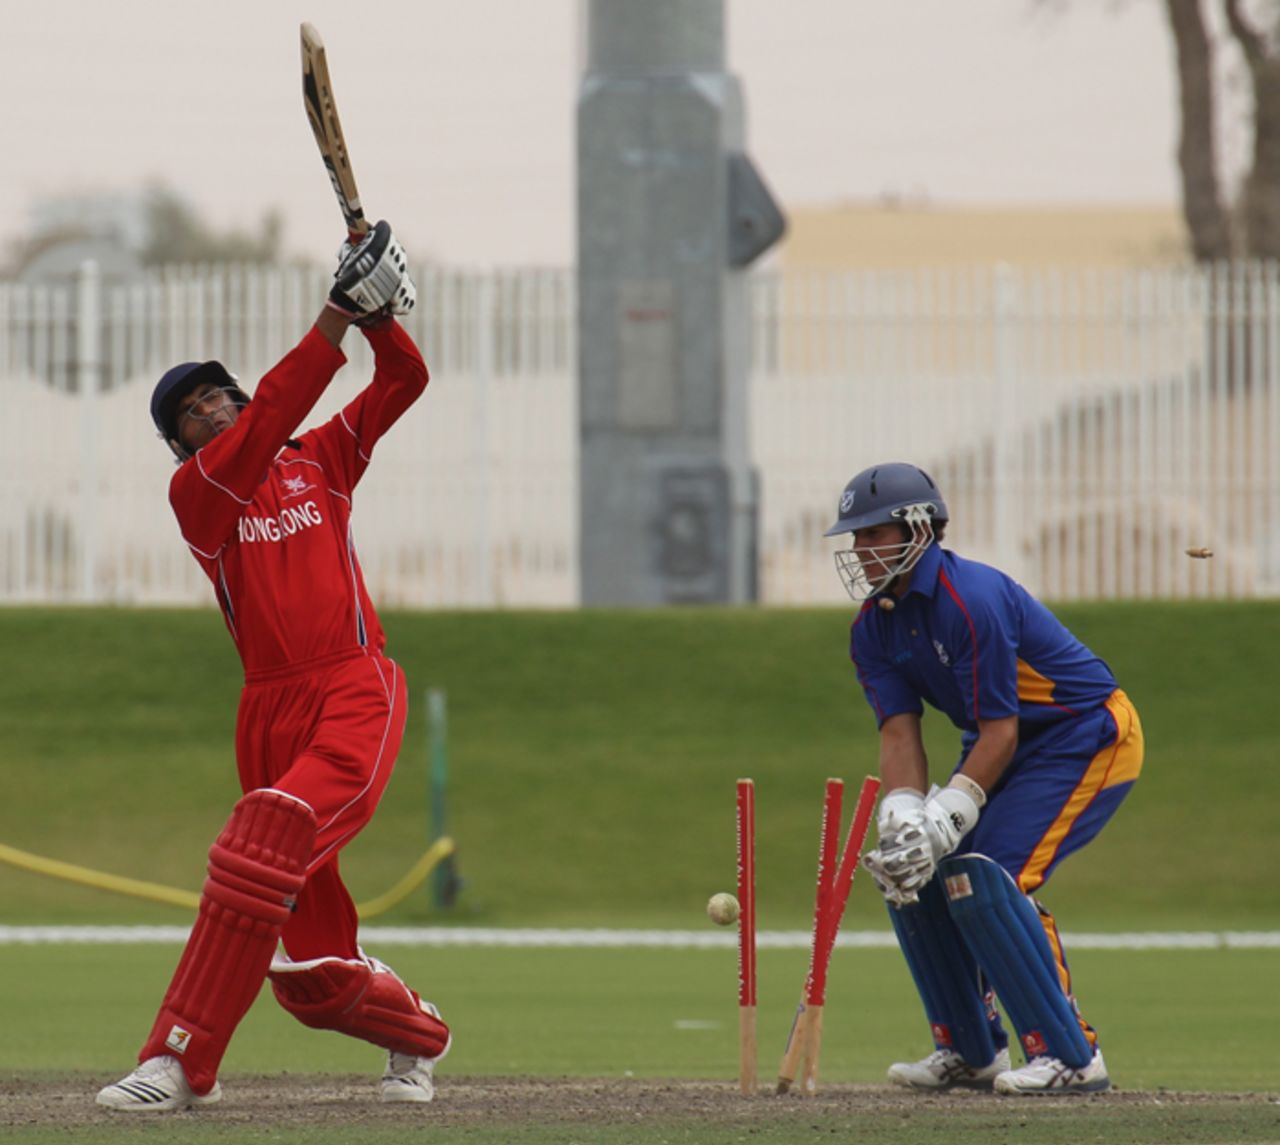 Adil Mehmood is bowled against Namibia XI in a WCL2 warm-up game at the Emirates Sevens ground at Dubai on 5th April 2011